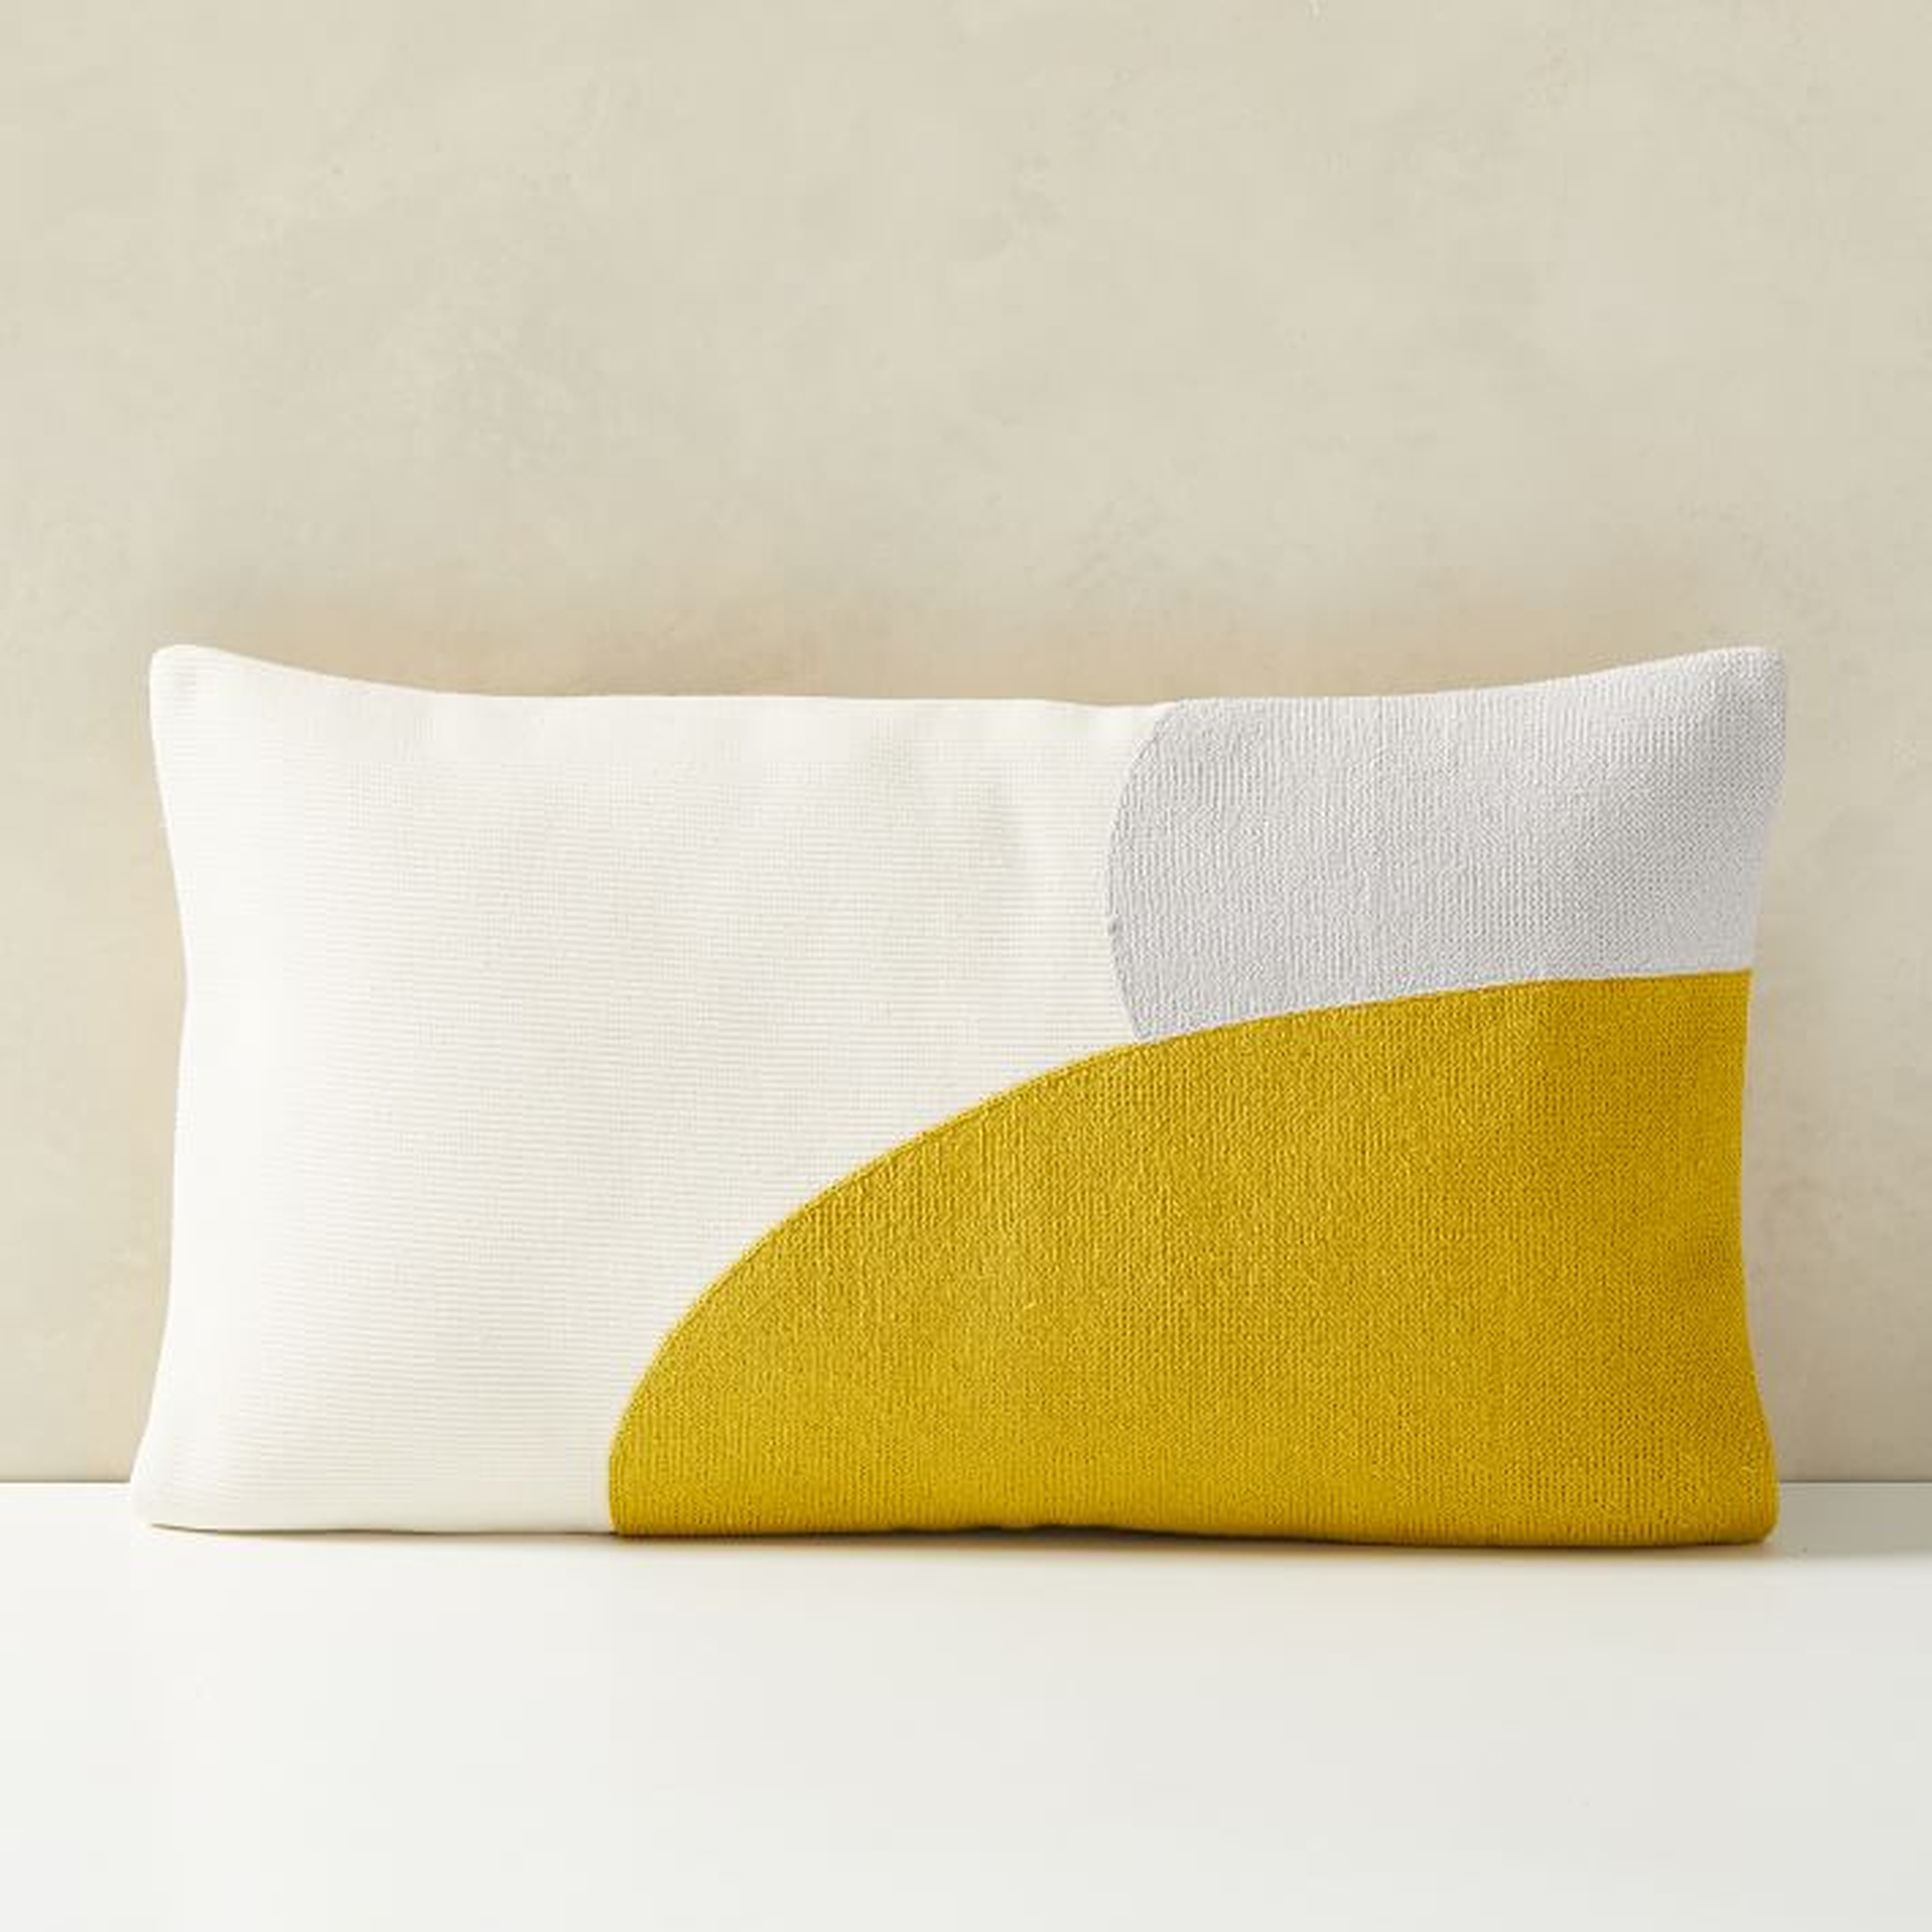 Corded Color Shapes Pillow Cover, 12"x21", Dark Horseradish - West Elm